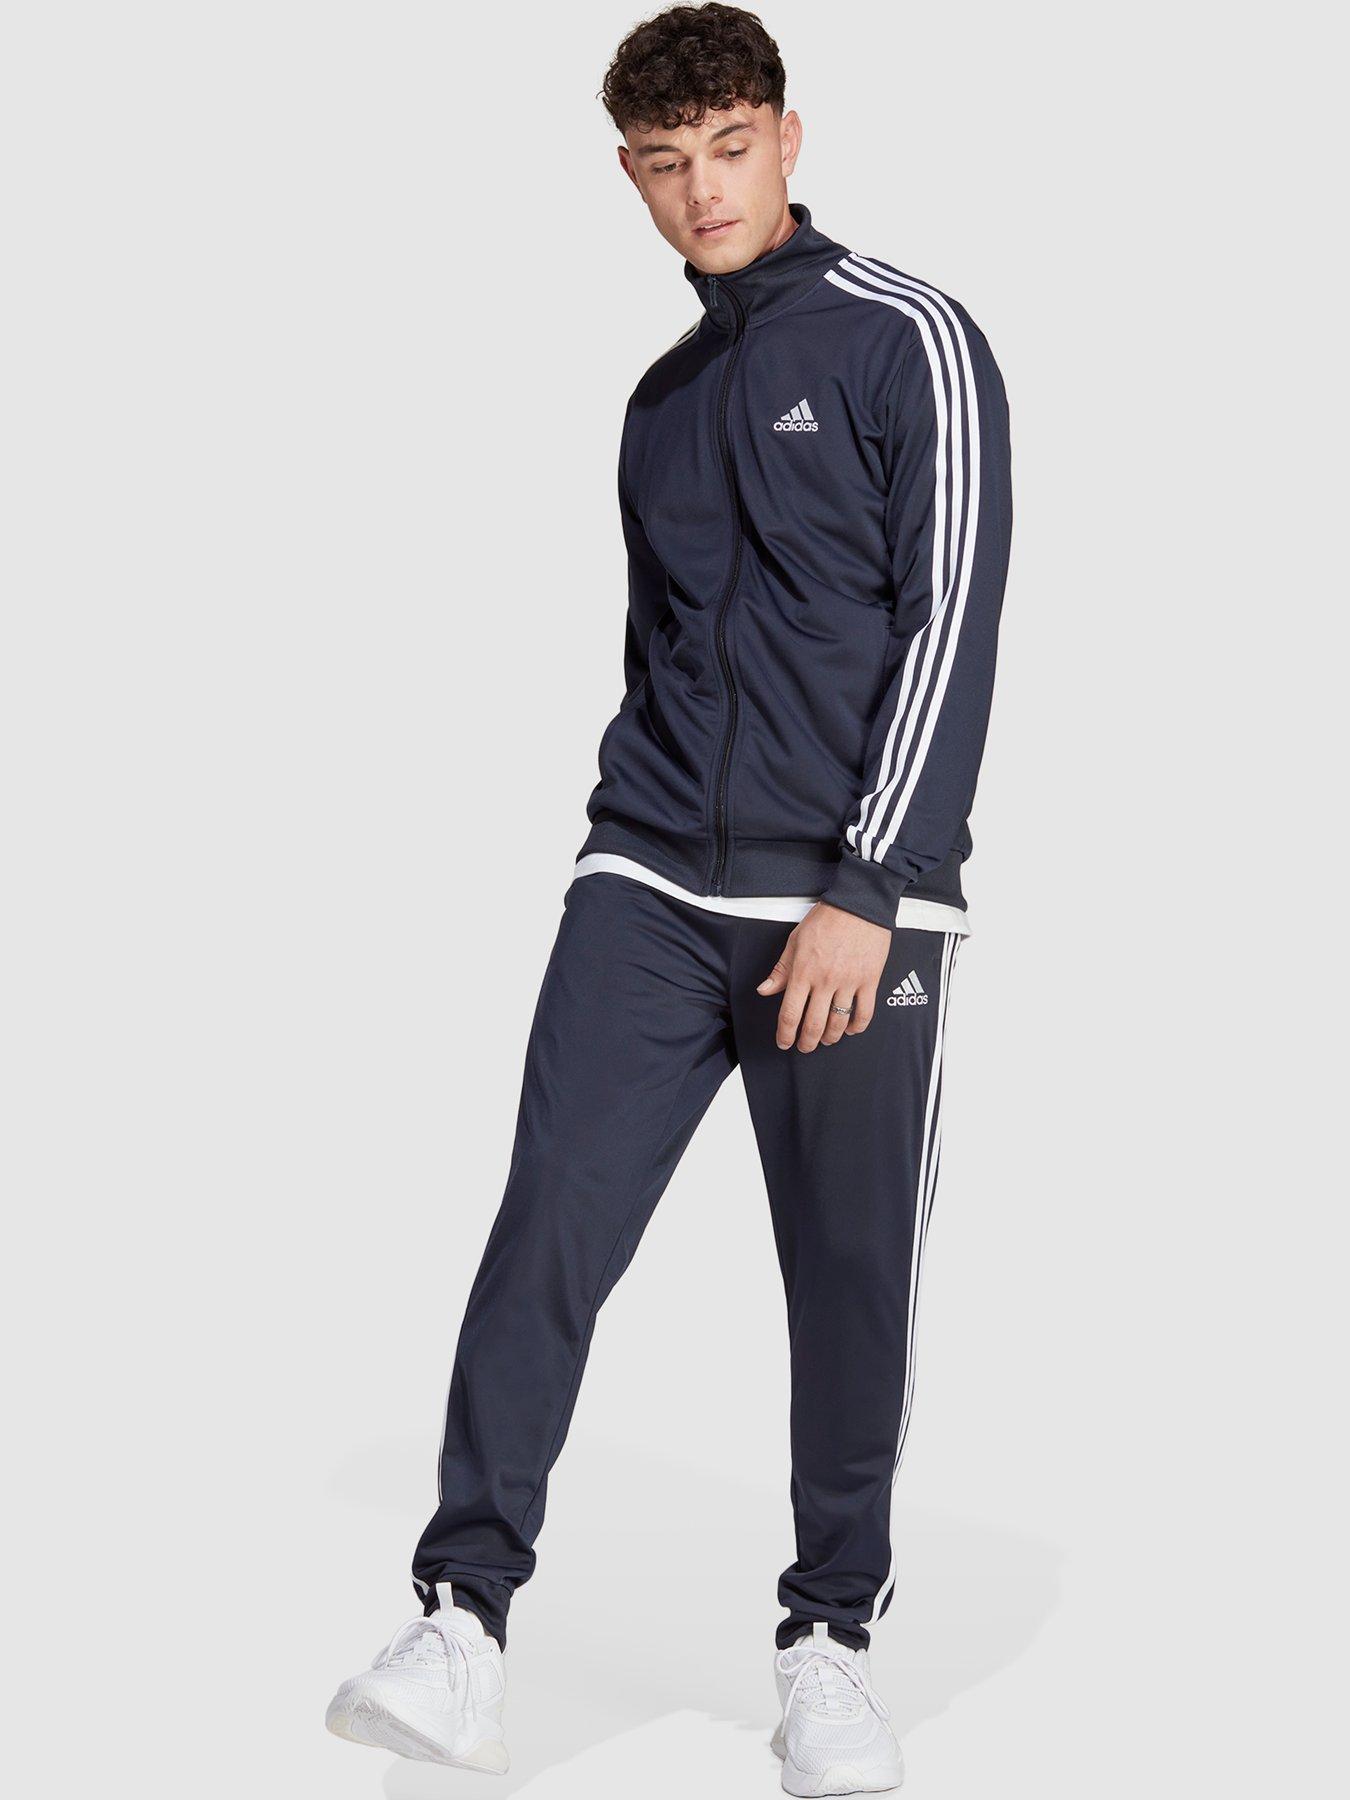 adidas Big and Tall Tricot Track Pants in Black for Men